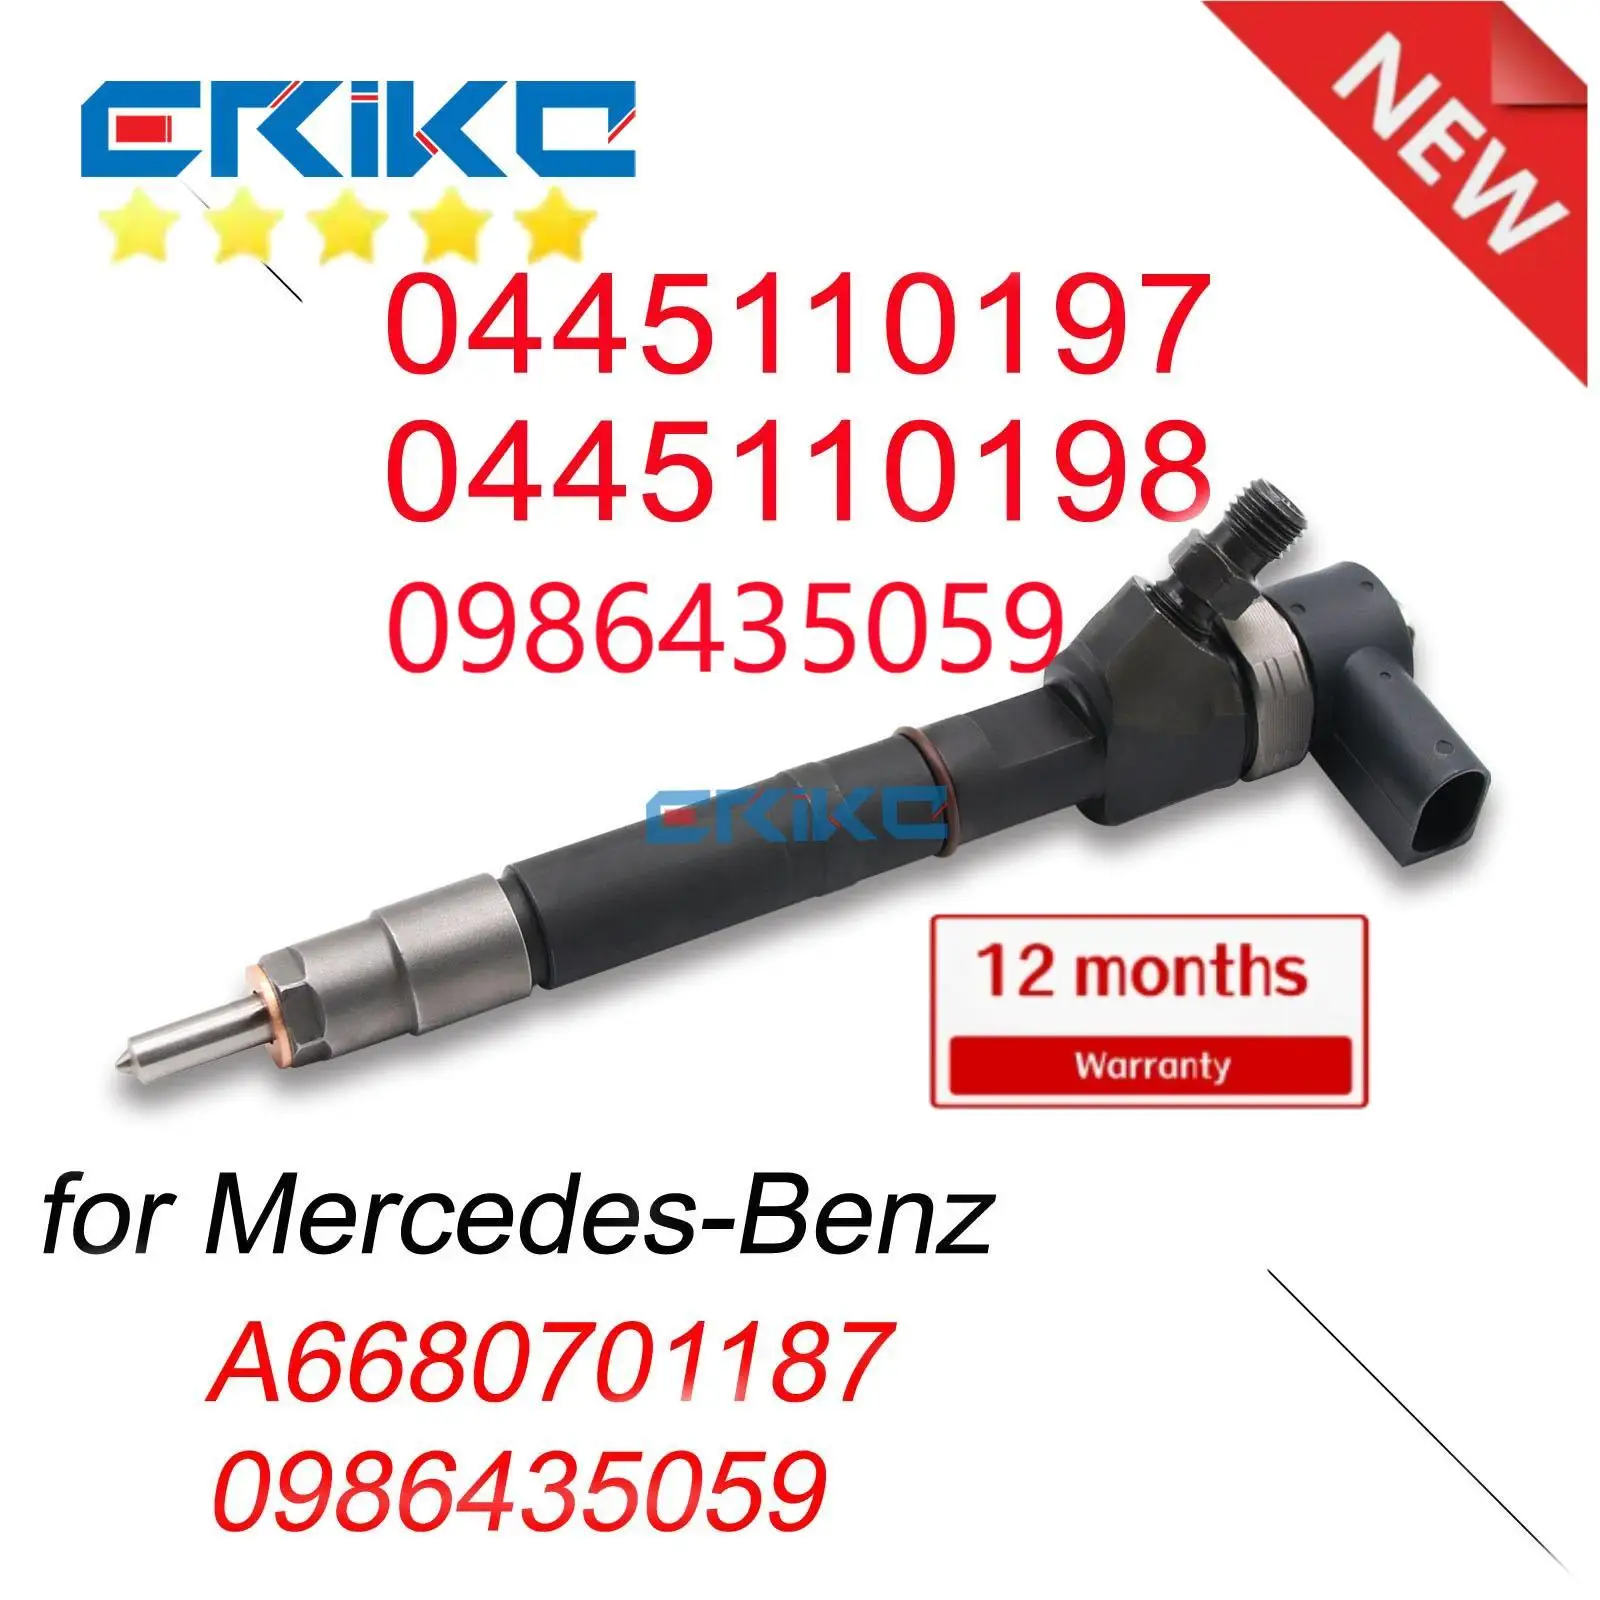 

0445110197 0445110198 Fuel Injection Jet A6680701187 Diesel Injector Nozzle Sprayer for Bosch Mercedes-Benz OEM 0986435059